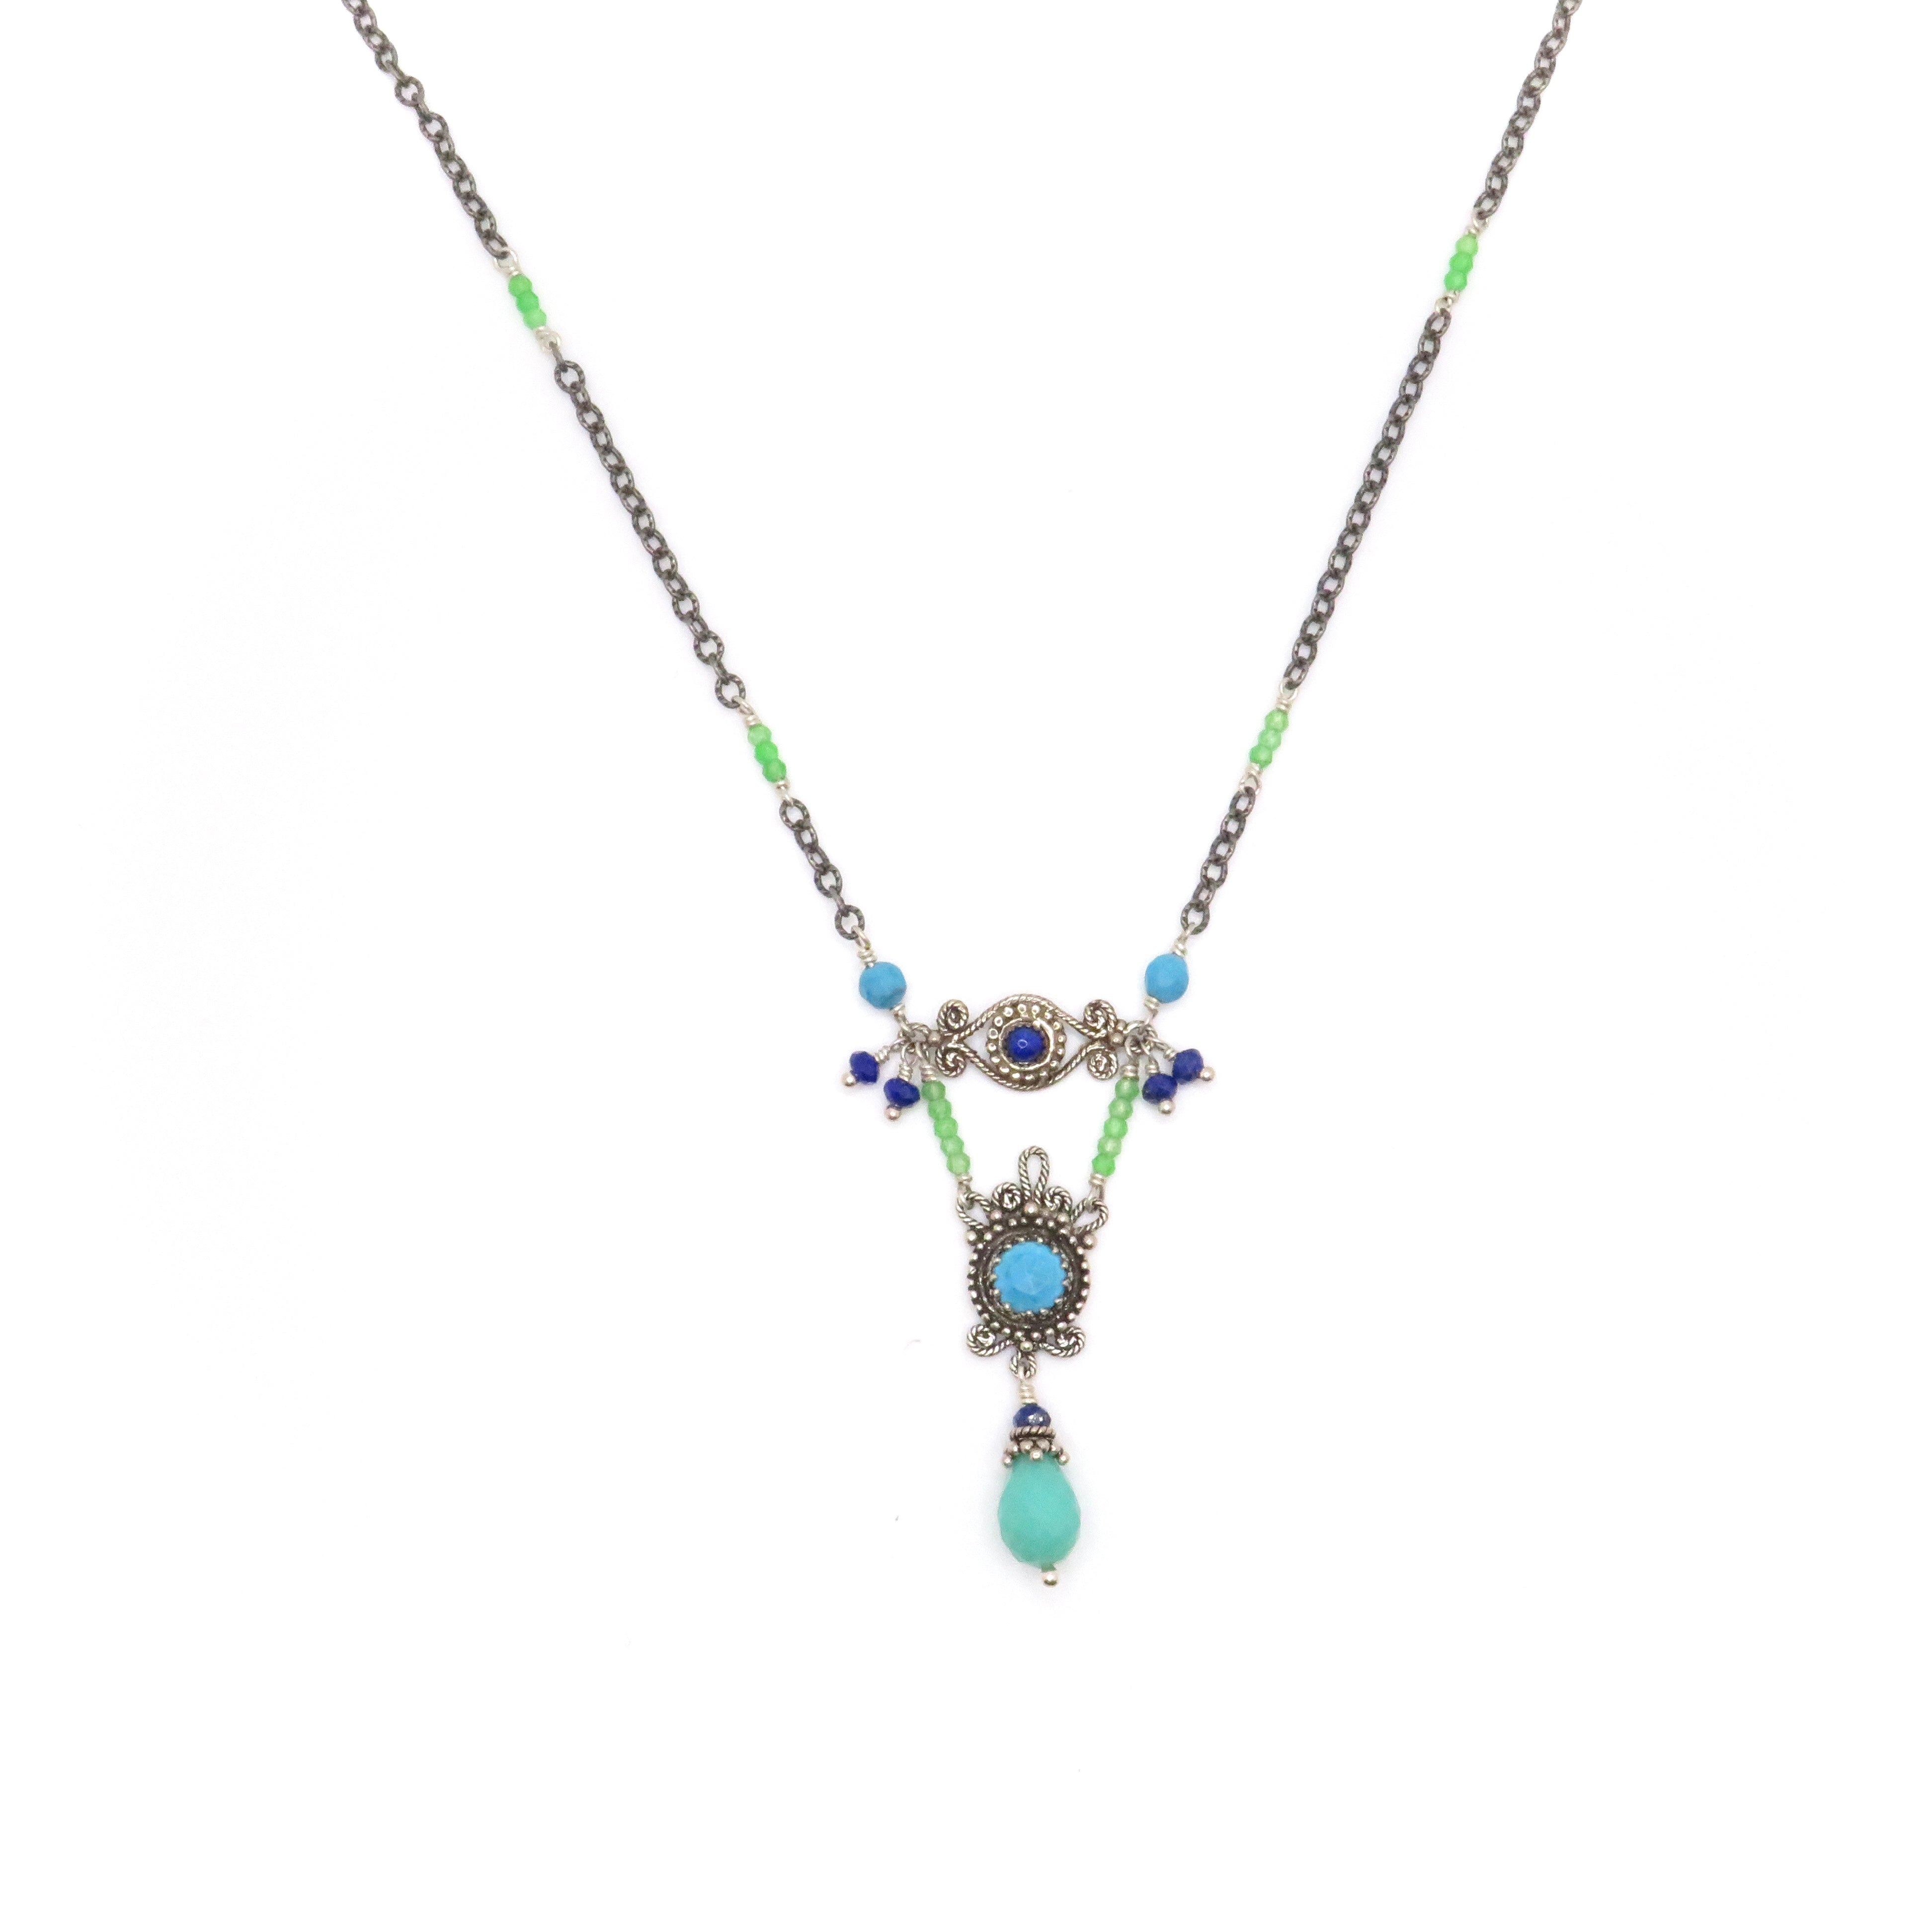 Turquoise, Lapis, Chrysoprase, and Silver Necklace